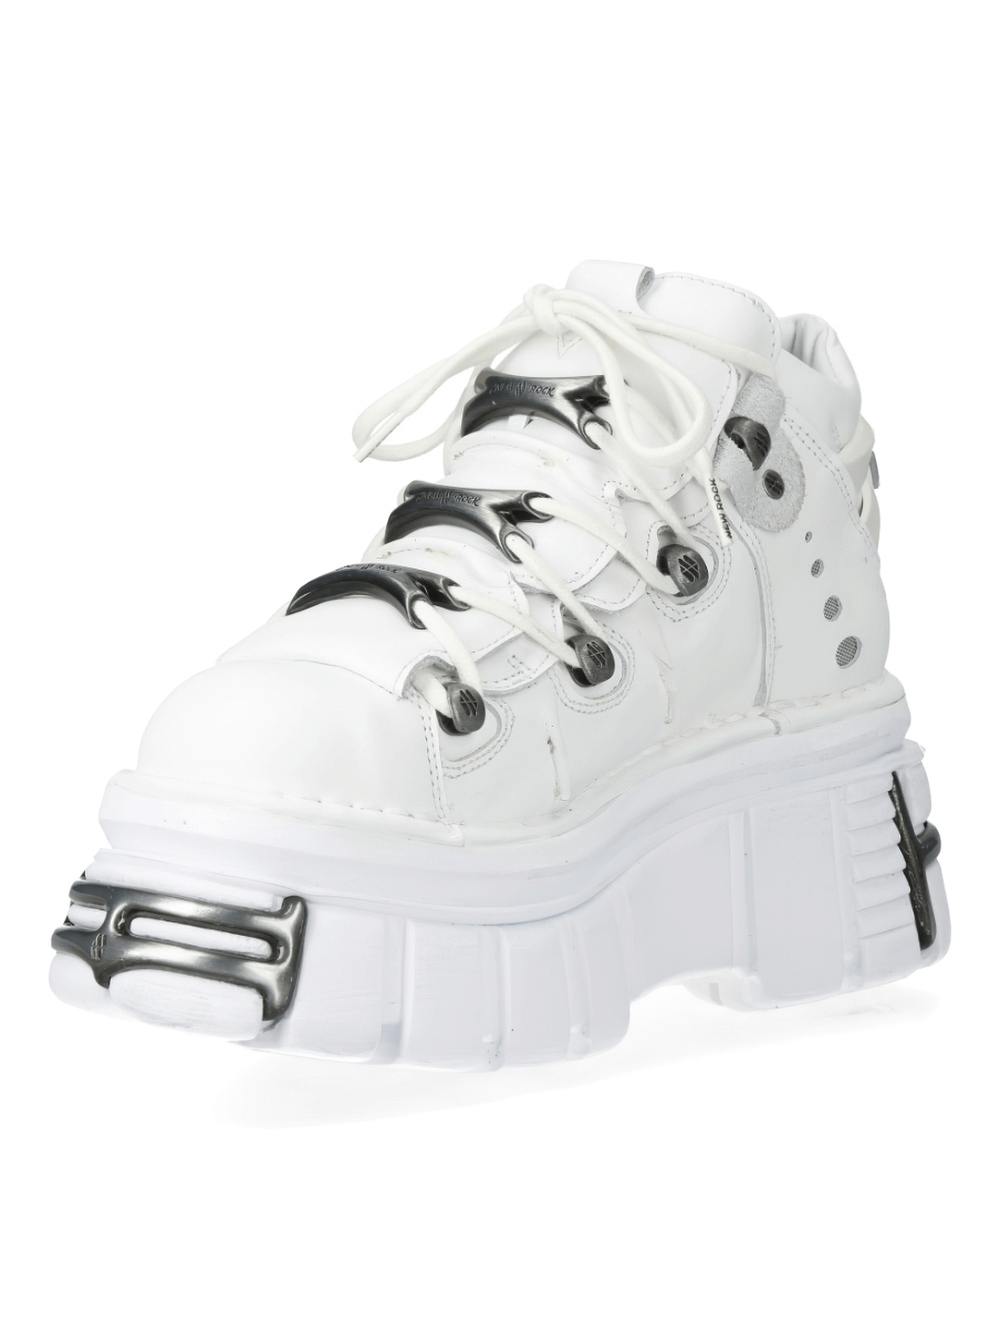 NEW ROCK Gothic White Ankle Boots with Metallic Edge